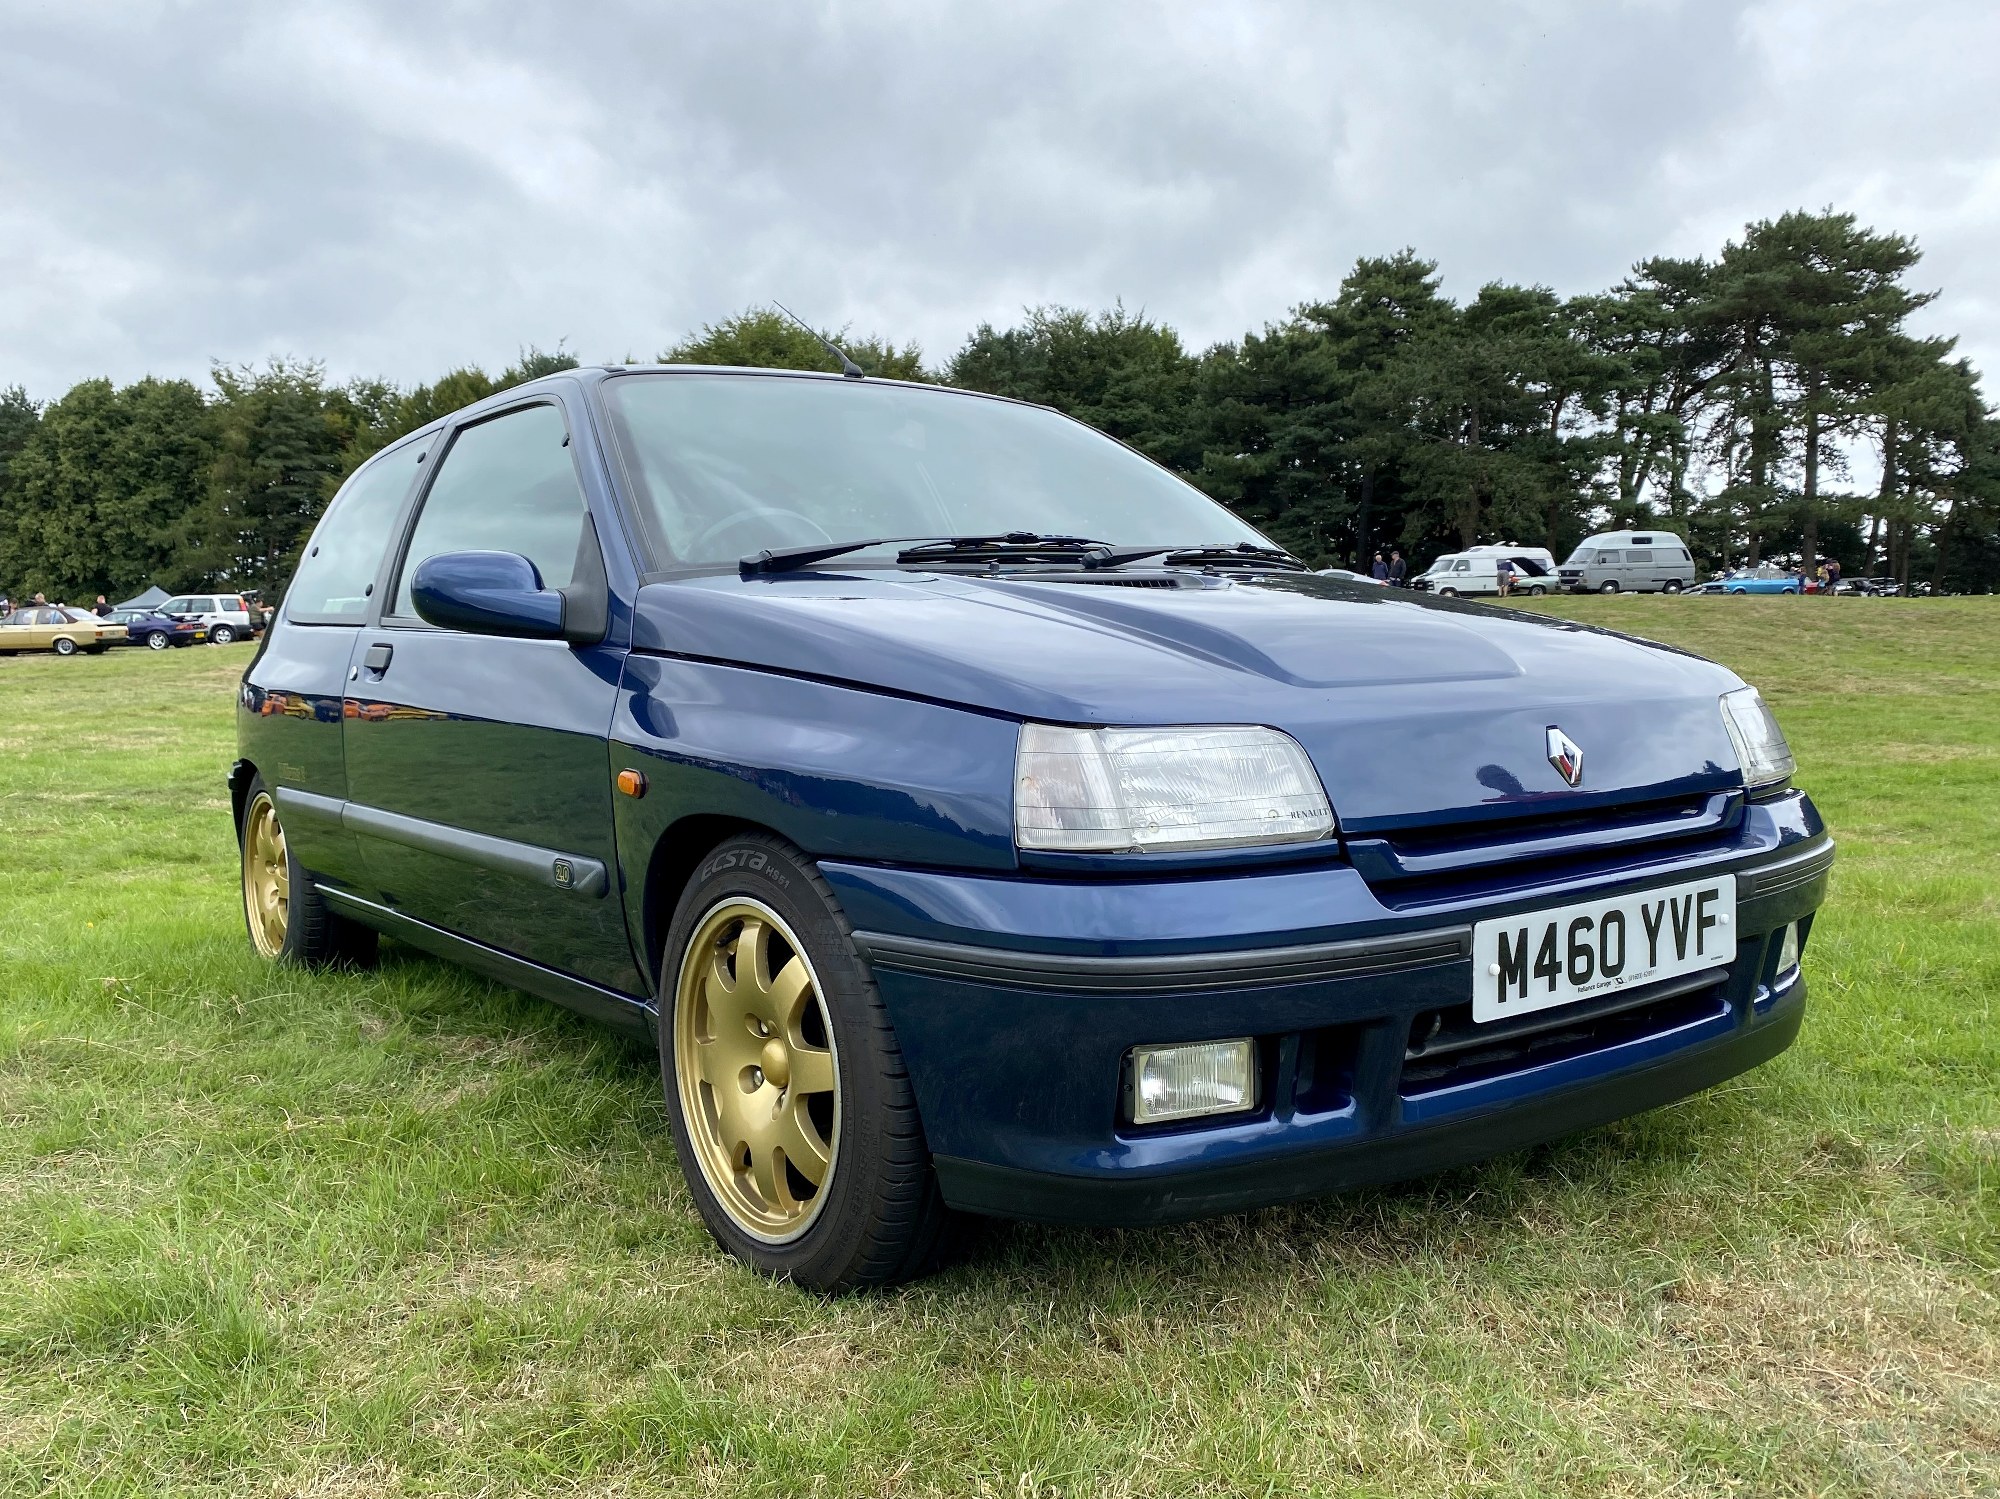 1995 RENAULT CLIO WILLIAMS 2 for sale by auction in Taunton, Somerset,  United Kingdom